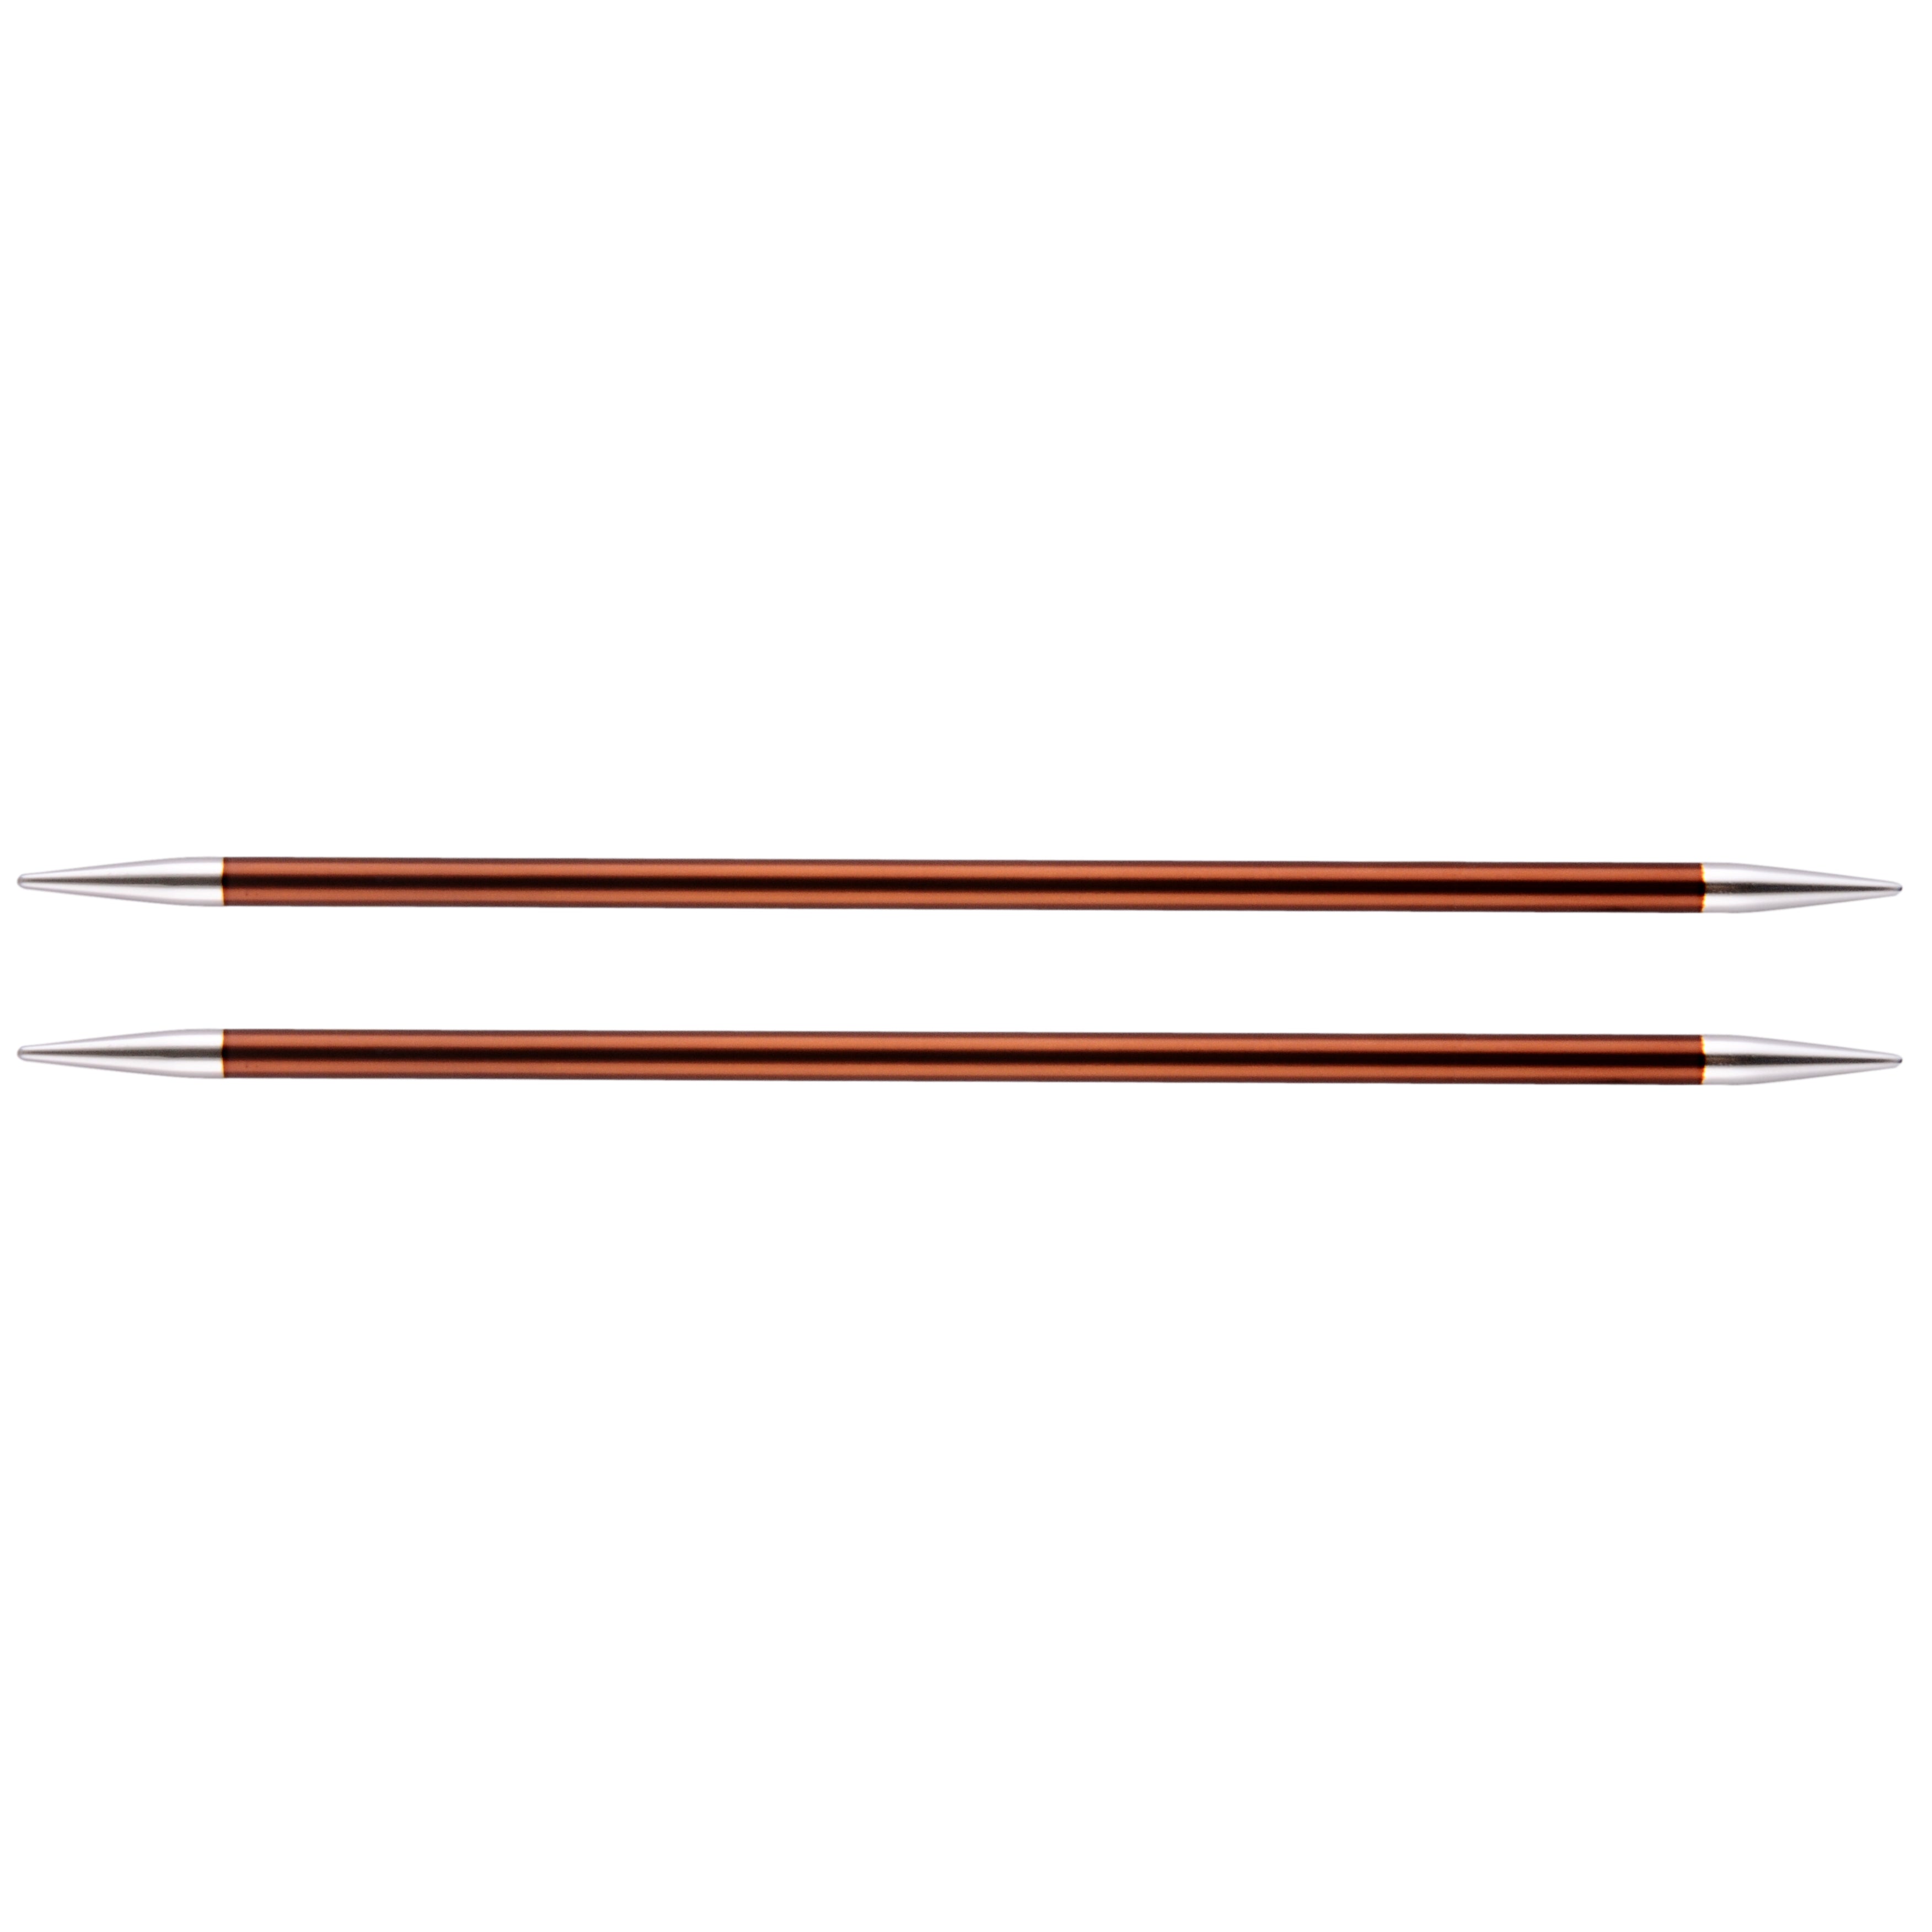 KnitPro Double Point Knitting Needles (Pack of 5) - Zing - 20cm